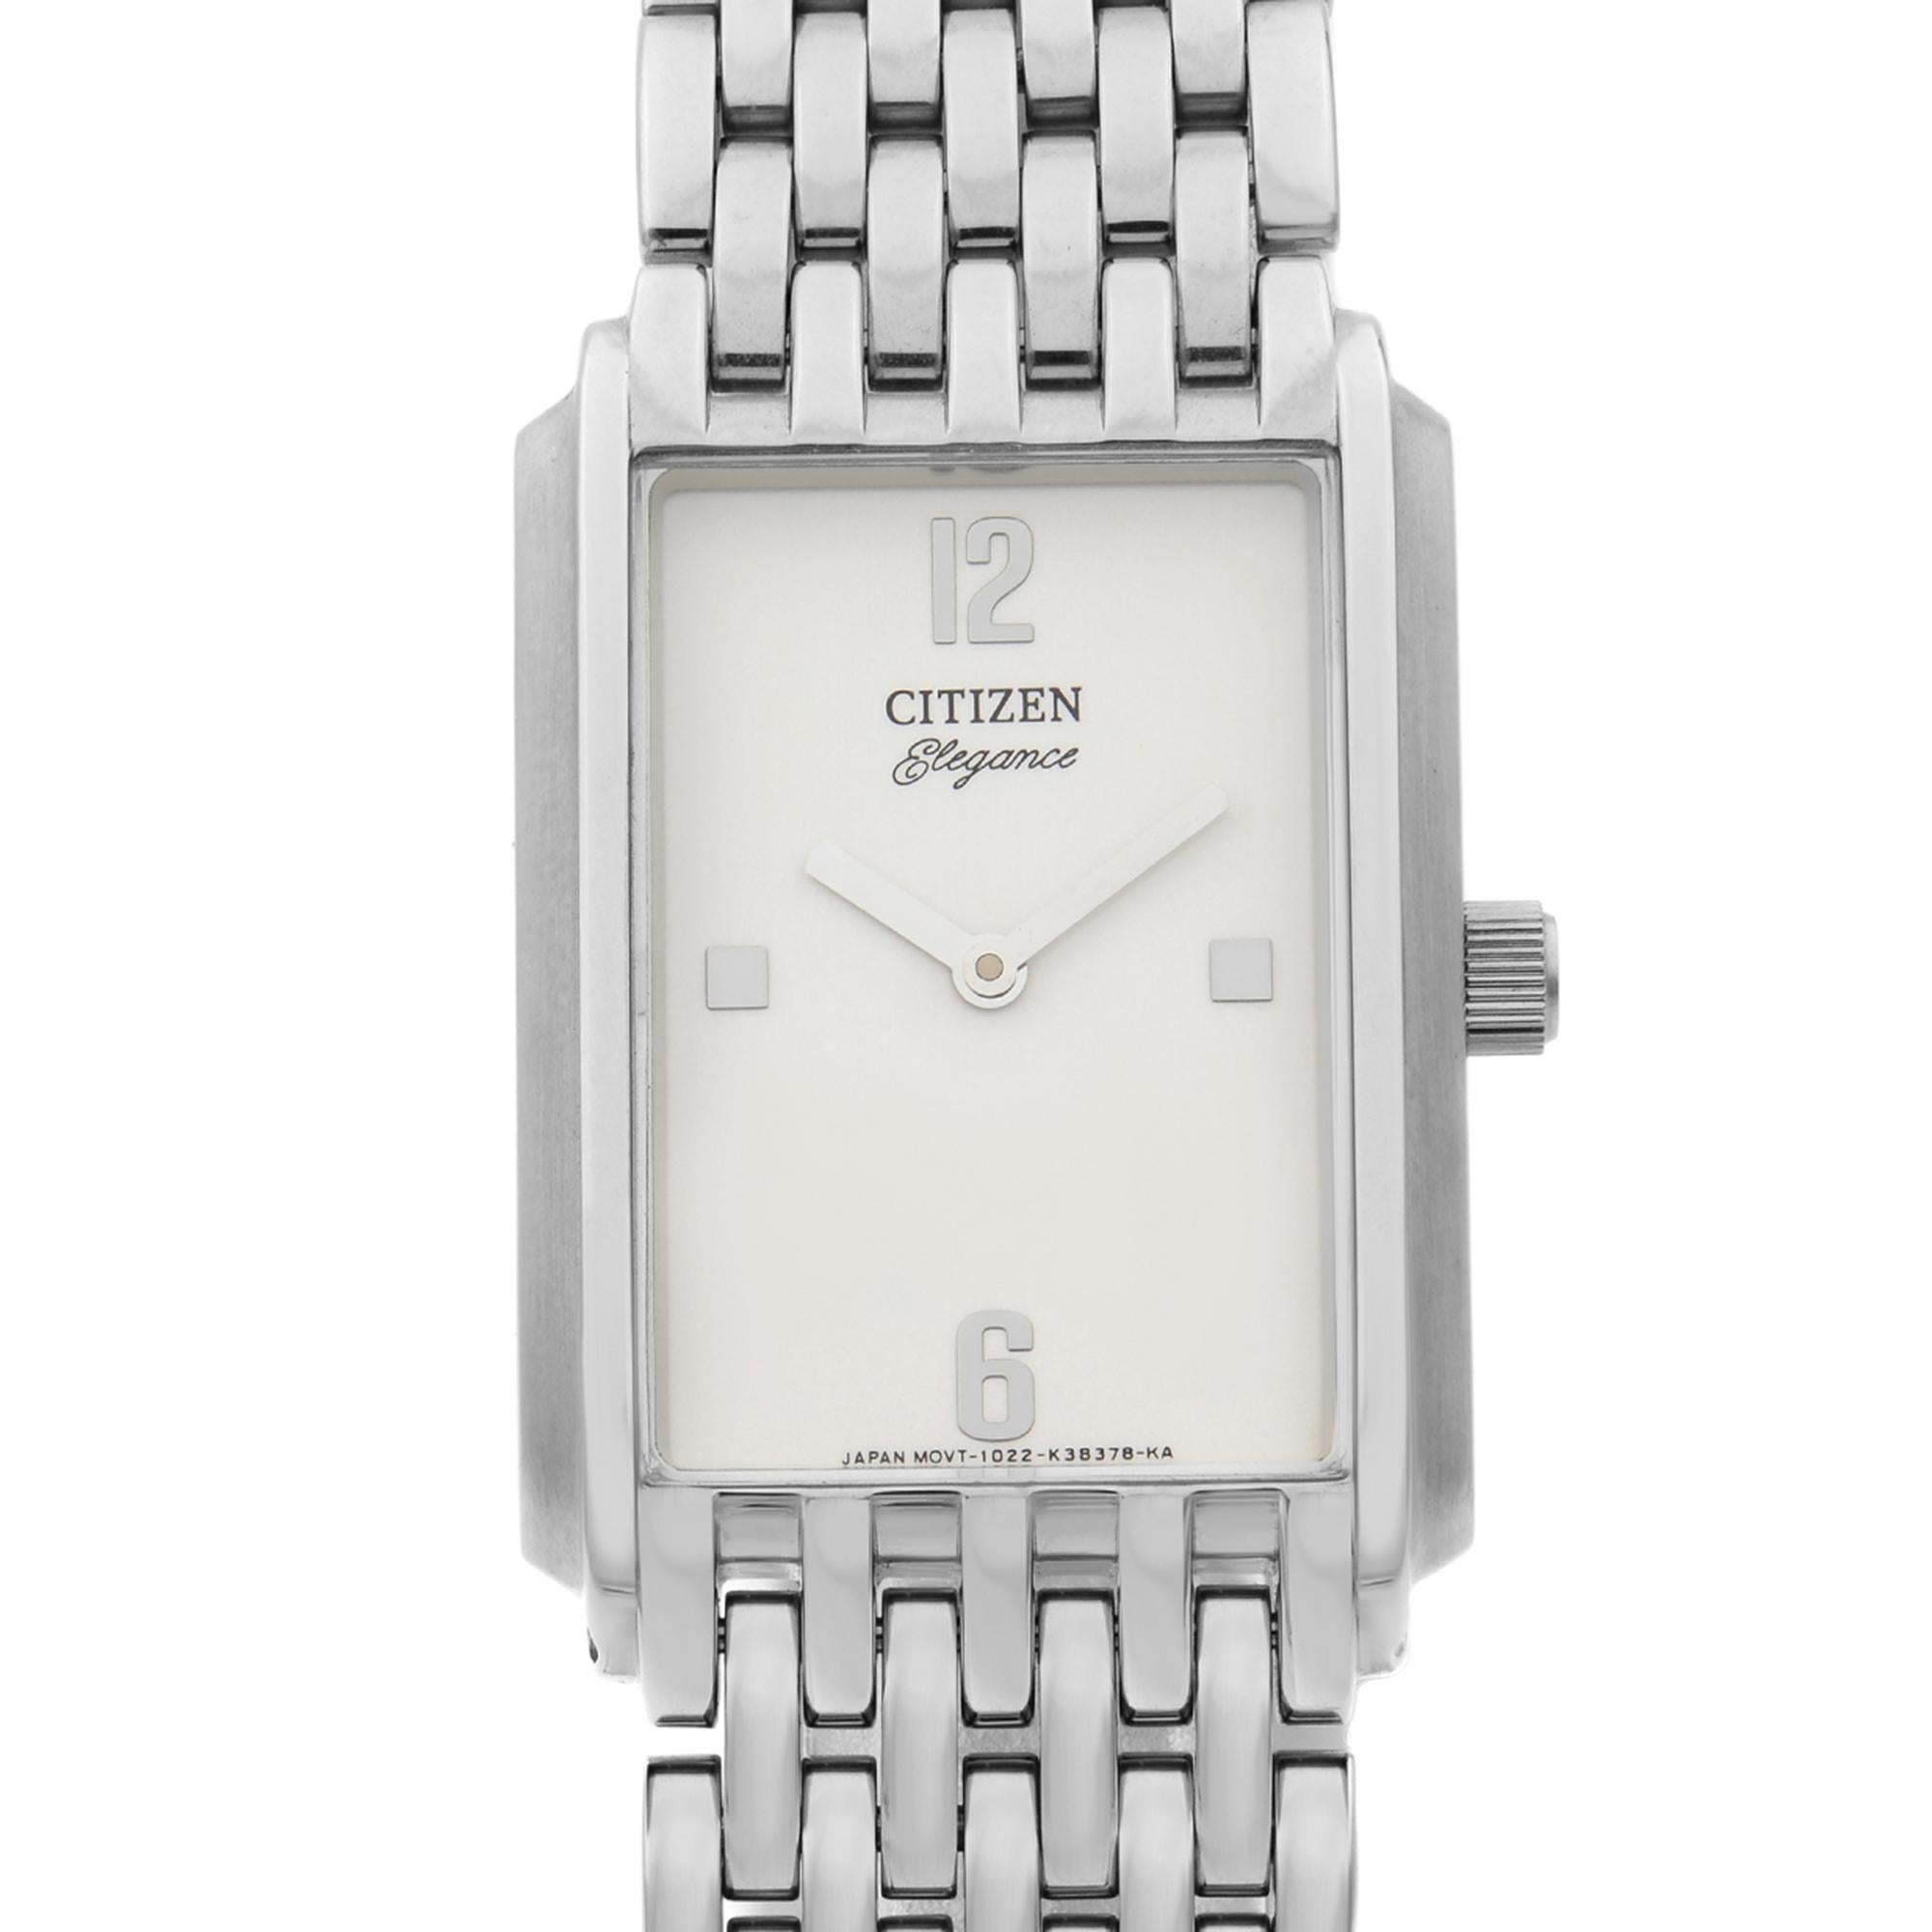 The timepiece comes with original box and papers.
White dial with silver tone hands and markers.
Japanese quartz movement.
Water resistant 30m.
Double fold over clasp.
Scratch resistant mineral.
Case 24mm.
Brand	Citizen
Model